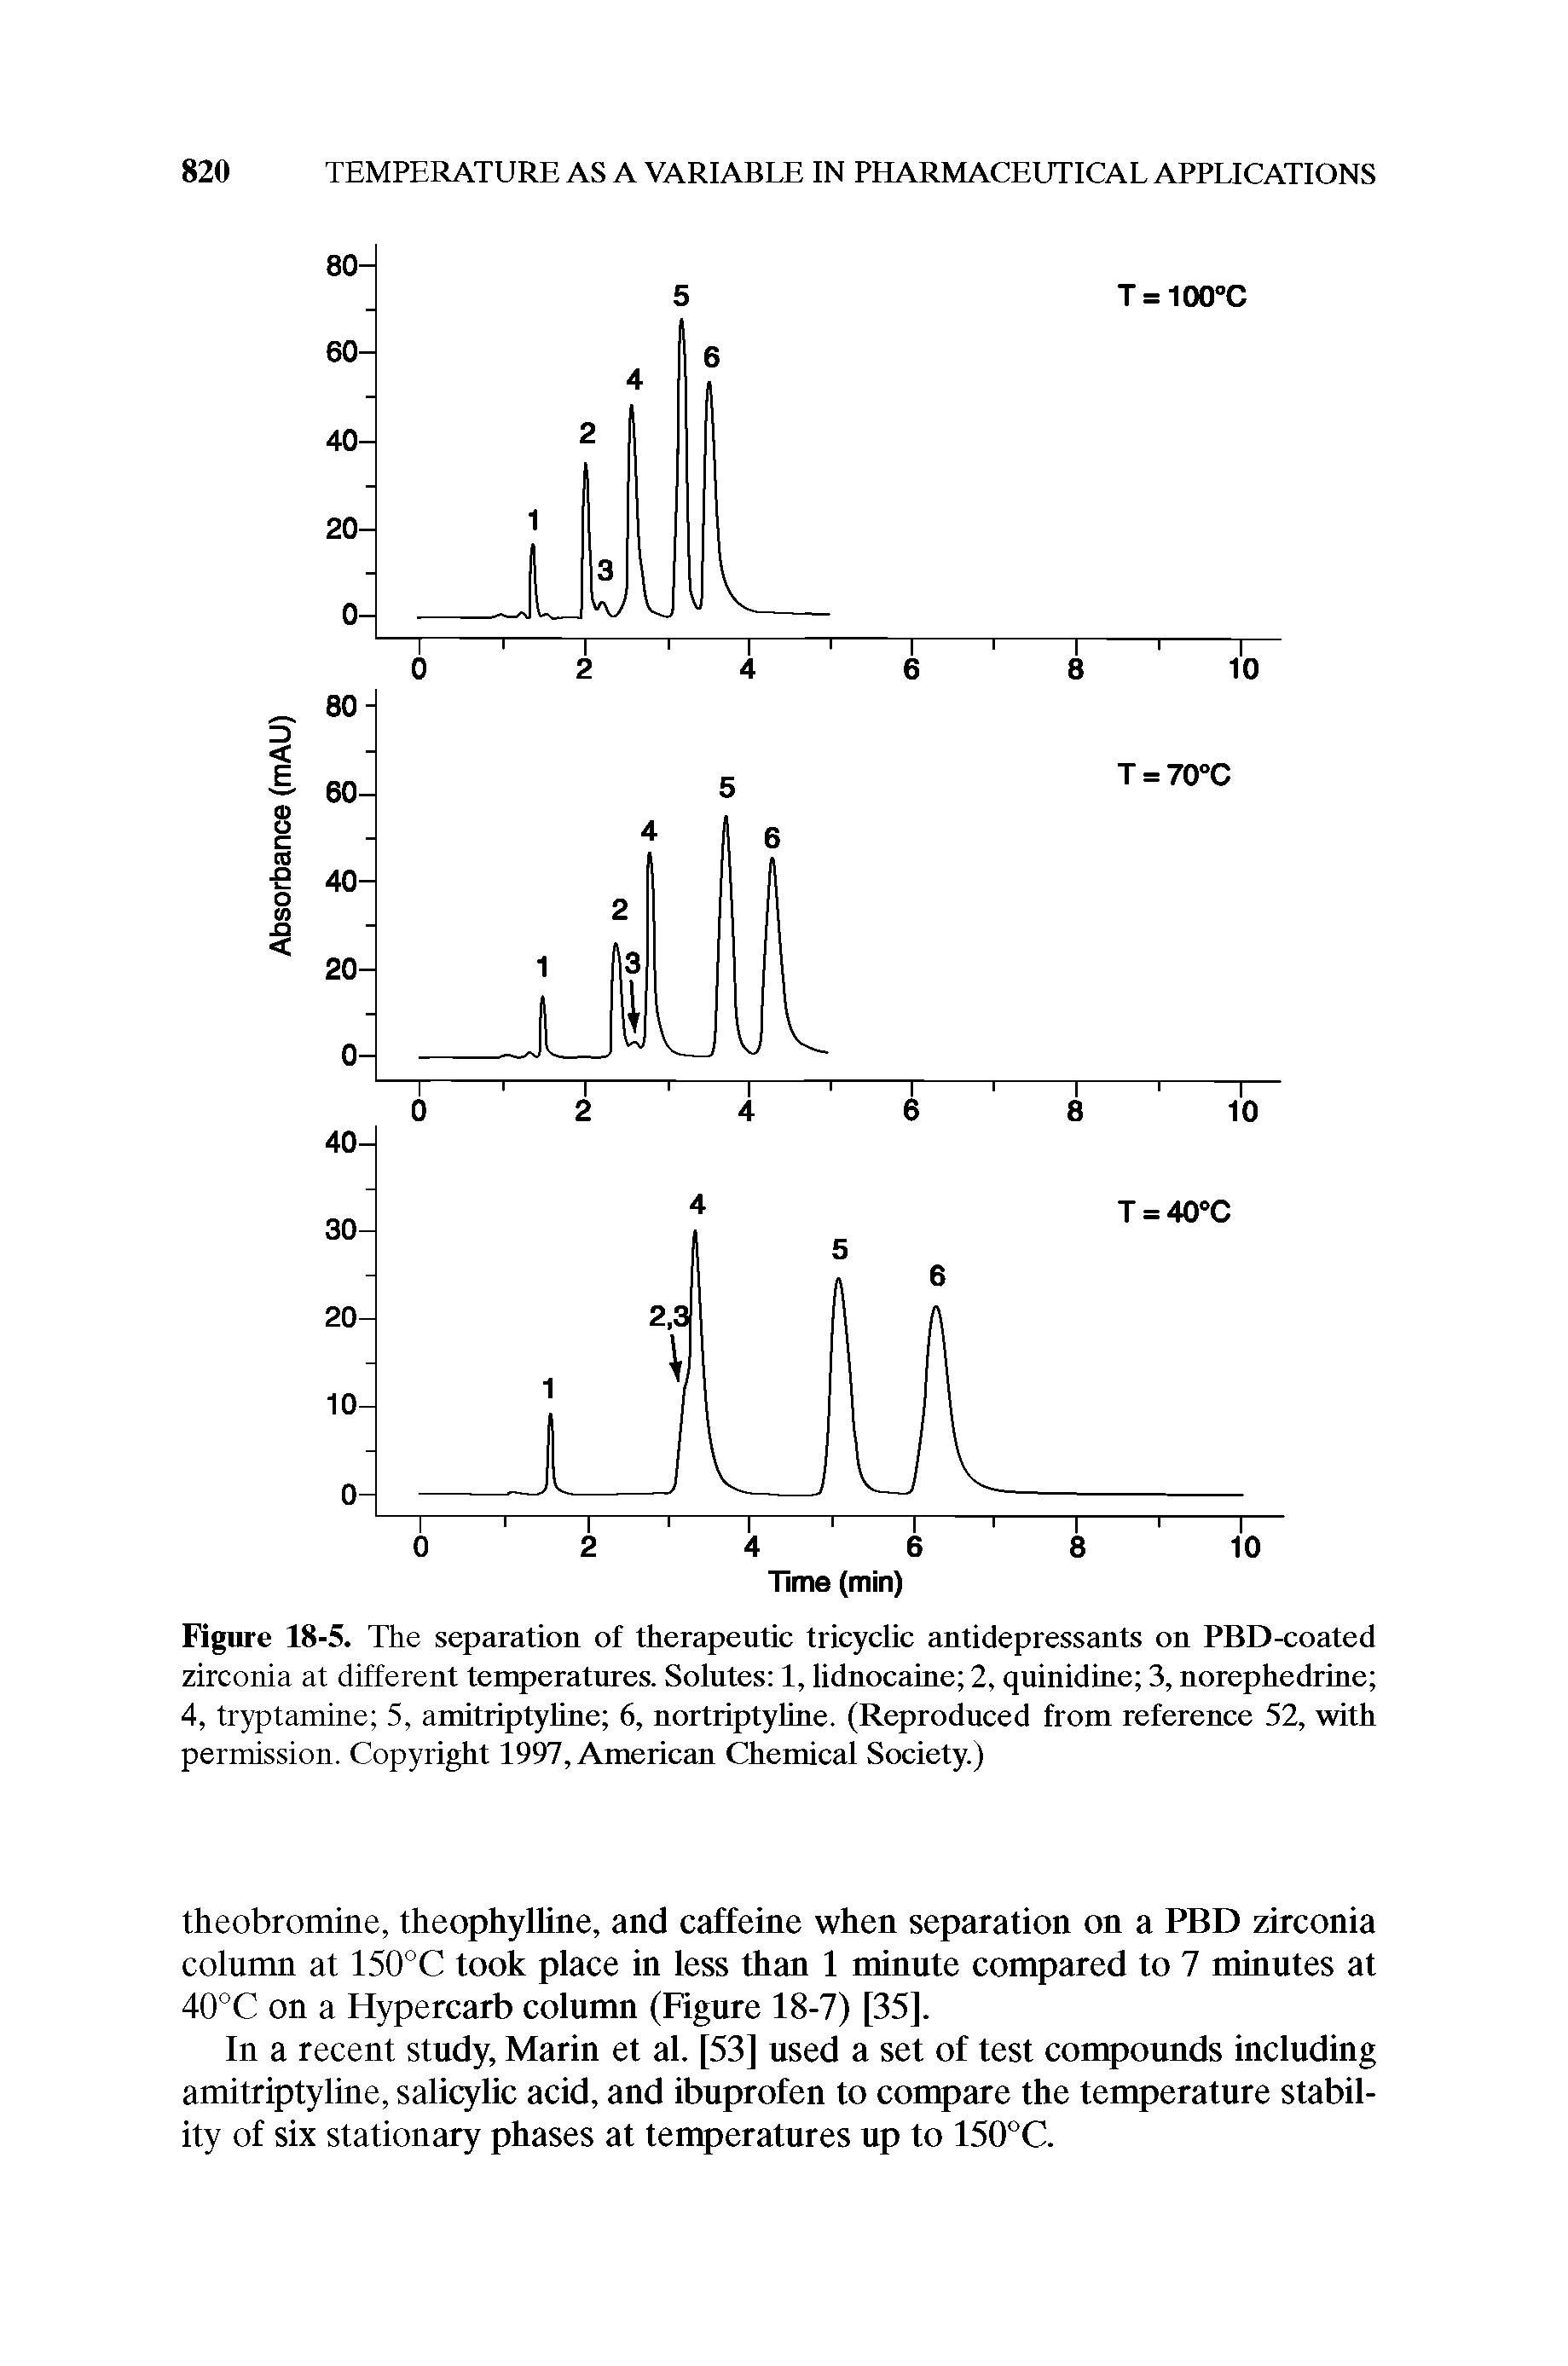 Figure 18-5. The separation of therapeutic tricyclic antidepressants on PBD-coated zirconia at different temperatures. Solutes 1, lidnocaine 2, quinidine 3, norephedrine 4, tryptamine 5, amitriptyline 6, nortriptyline. (Reproduced from reference 52, with permission. Copyright 1997, American Chemical Society.)...